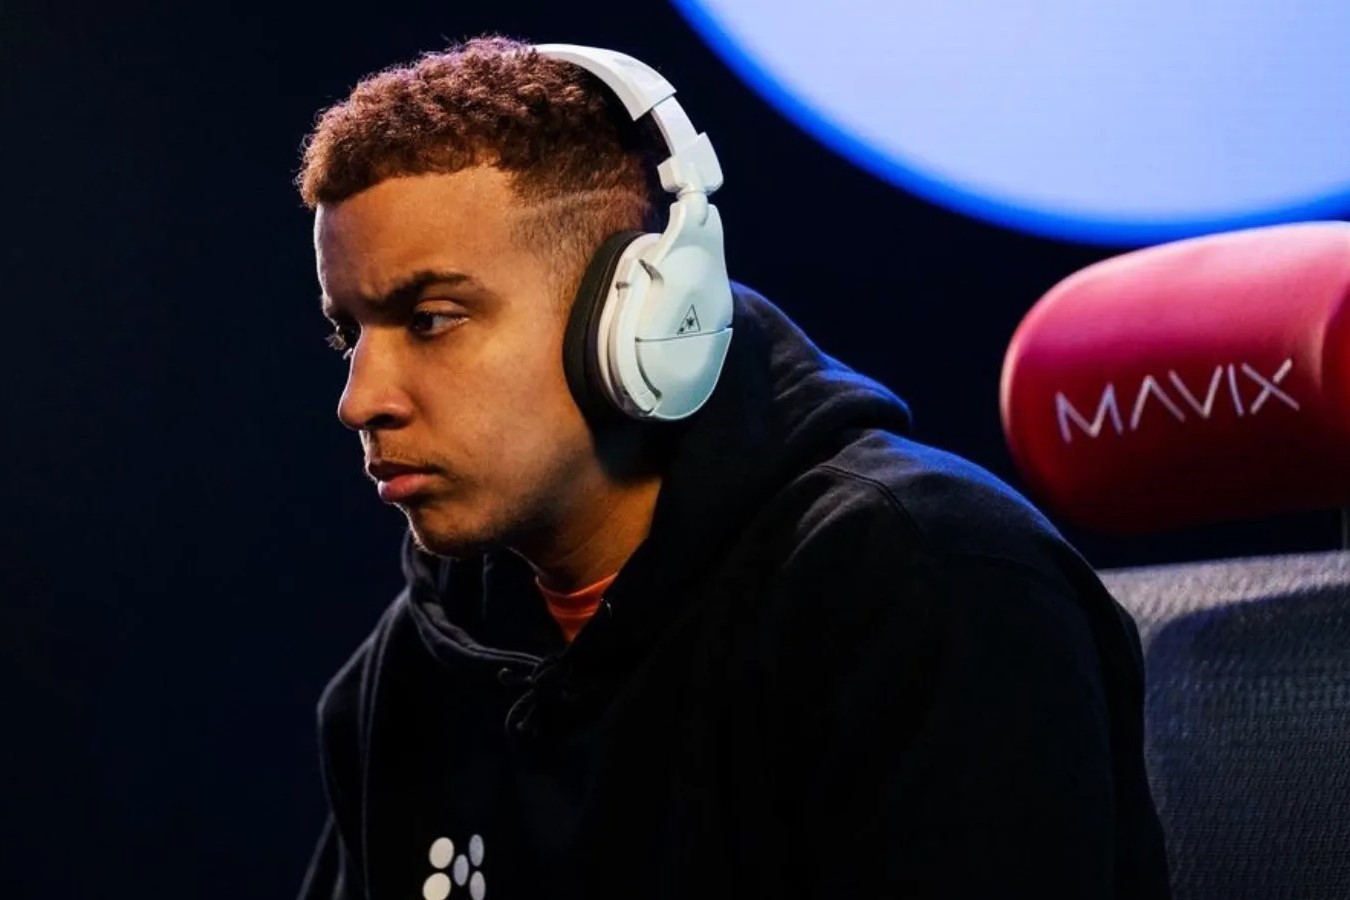 faze-swaggs-choice-a-look-at-his-gaming-headset